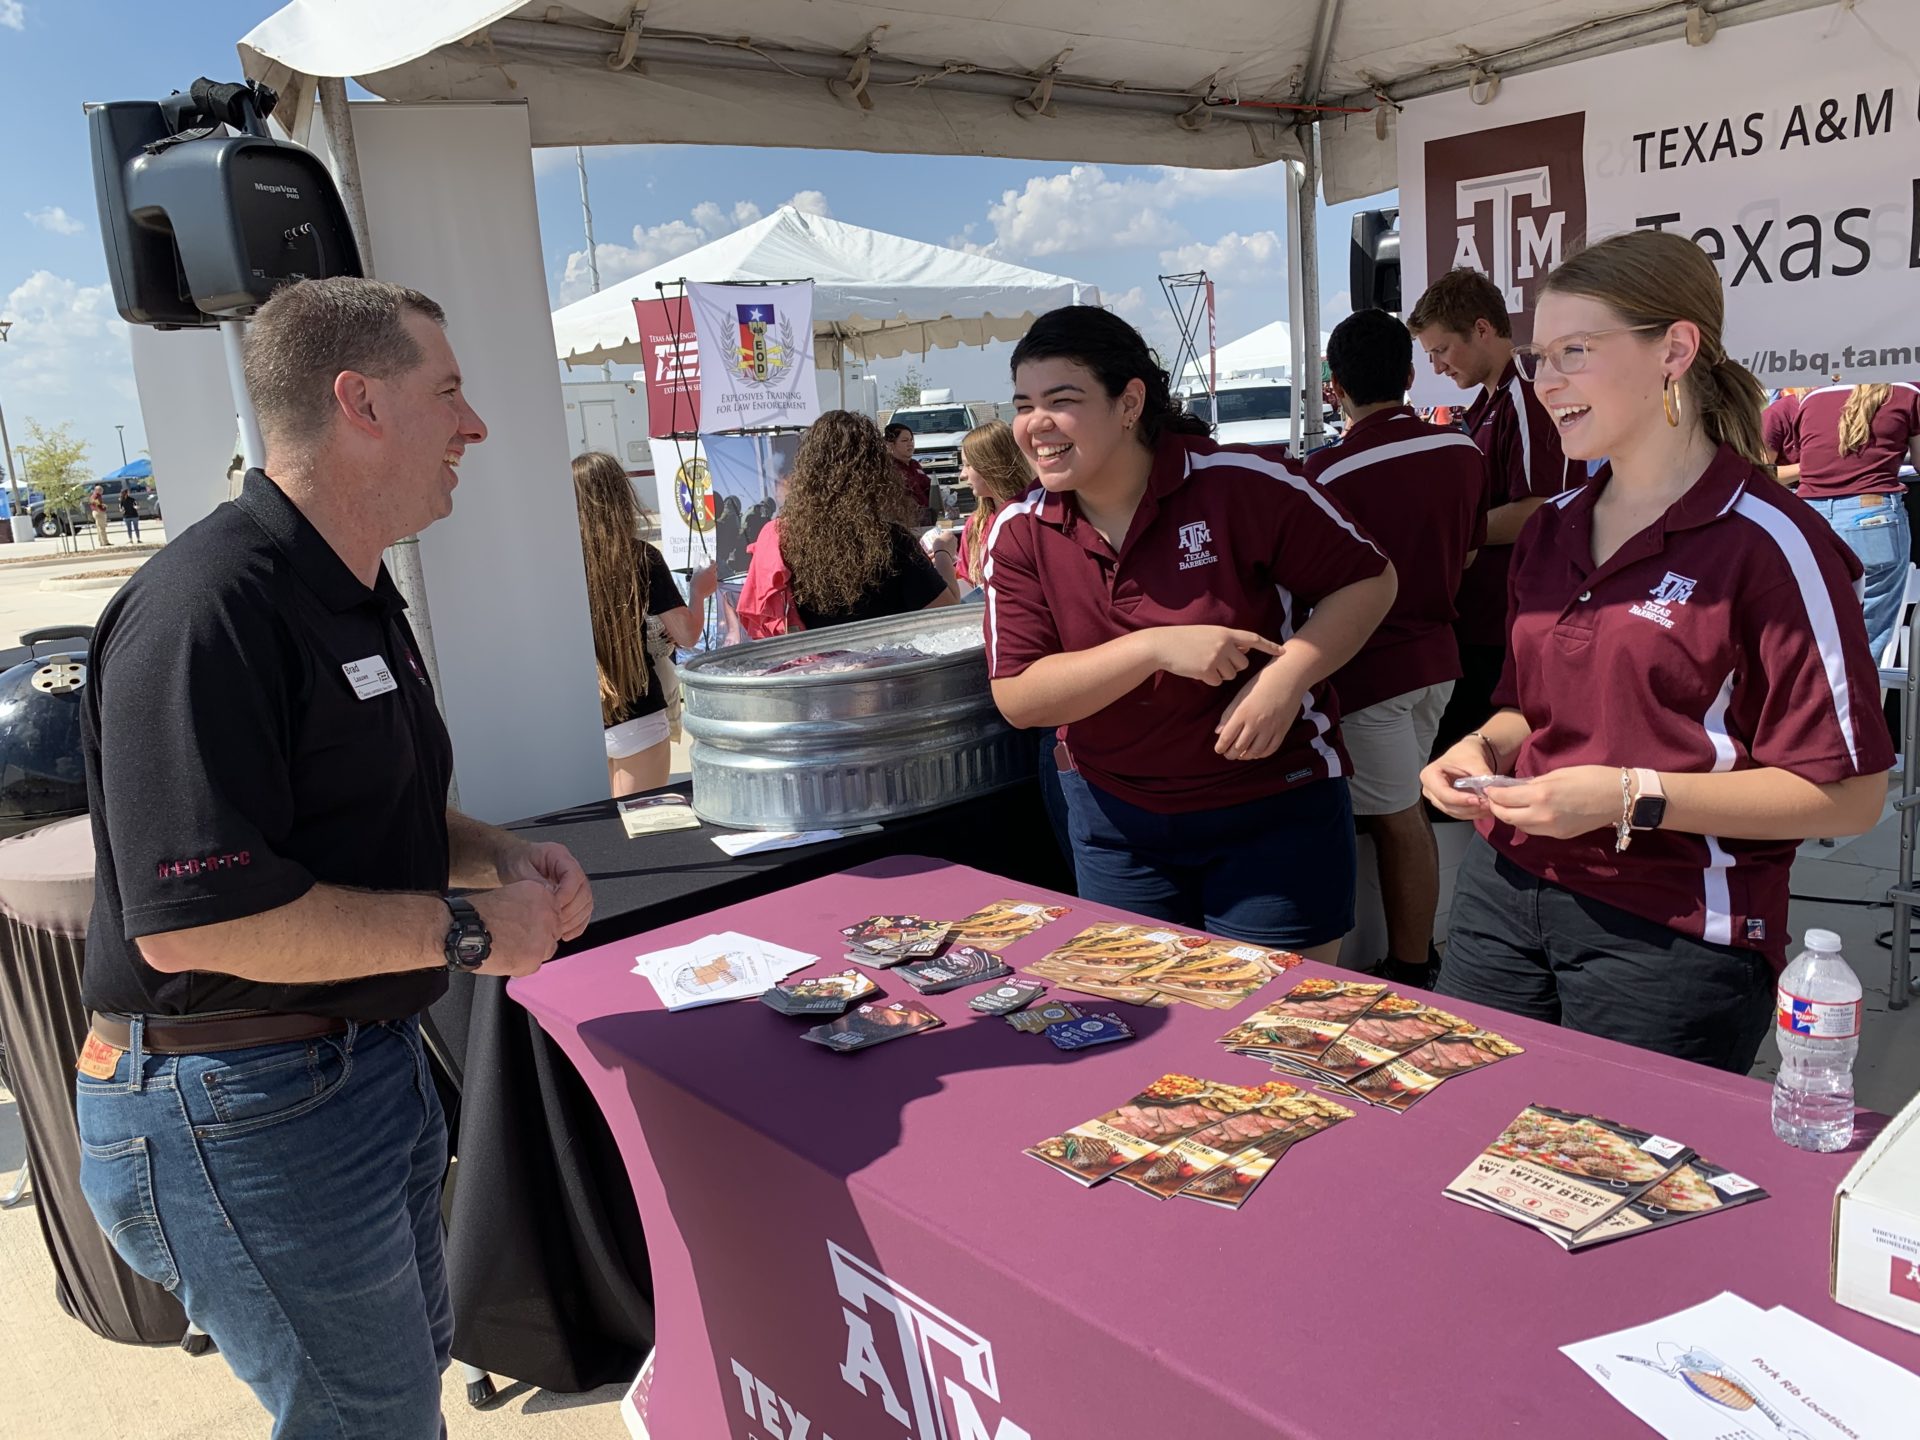 Jazmin Guerra and Bailey Carwile talking about the Texas Barbecue program at Texas A&M University